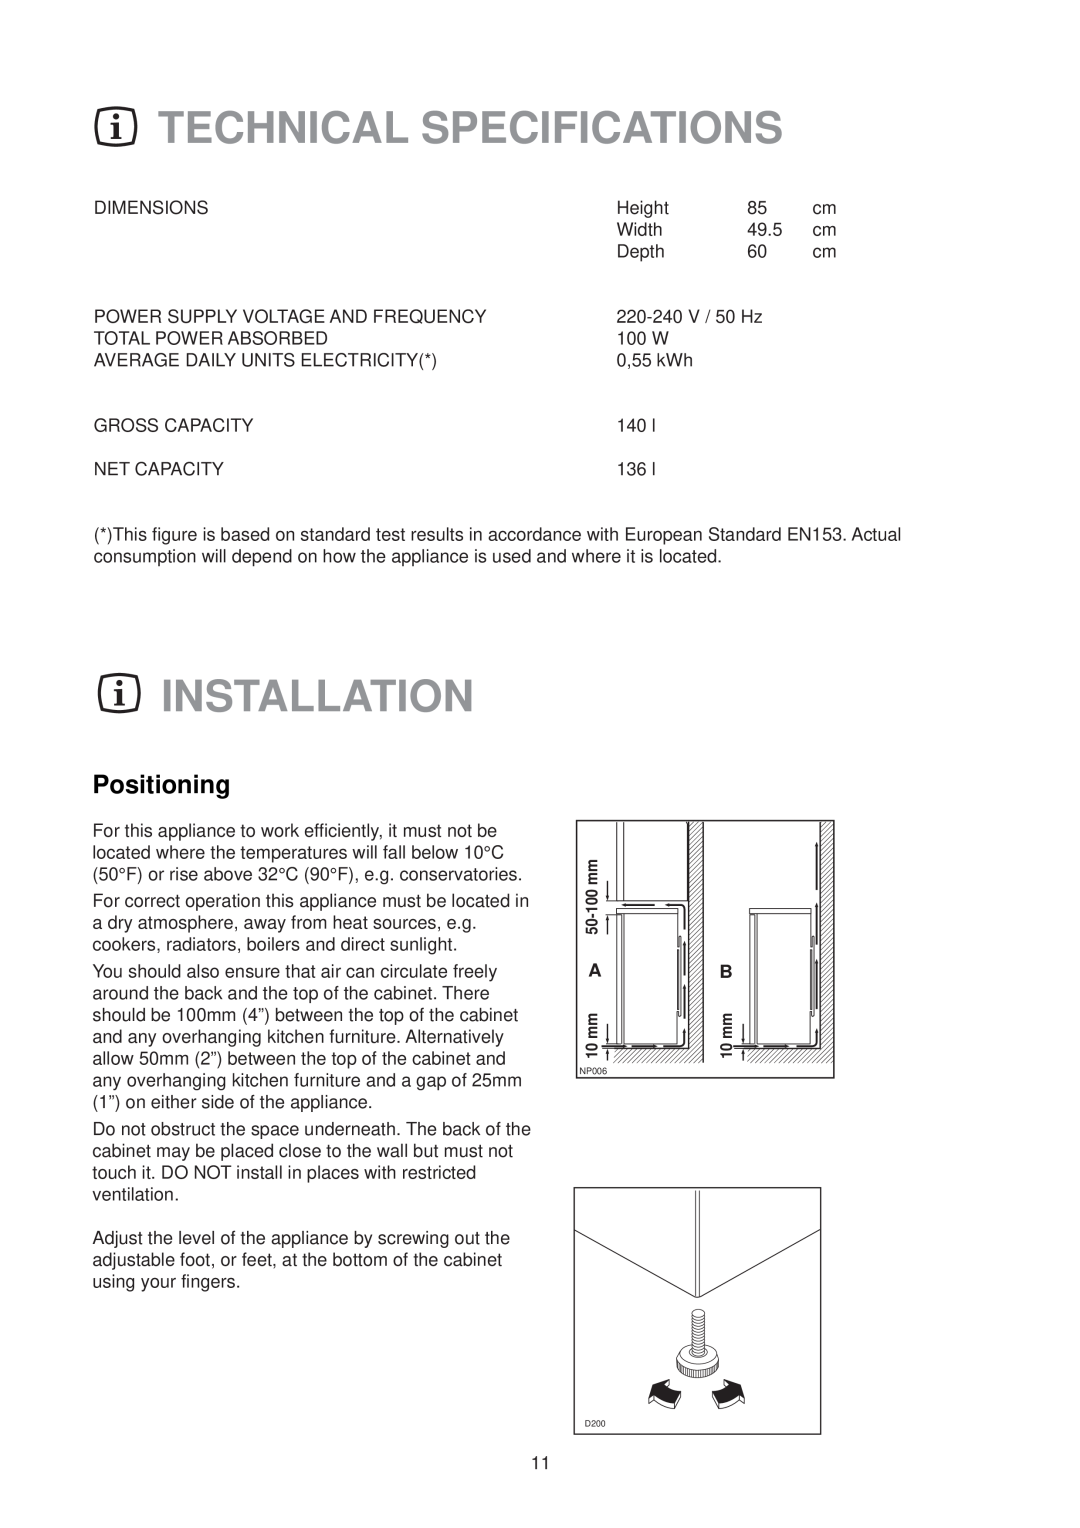 Zanussi ZL 25 W manual Technical Specifications, Installation, Positioning 